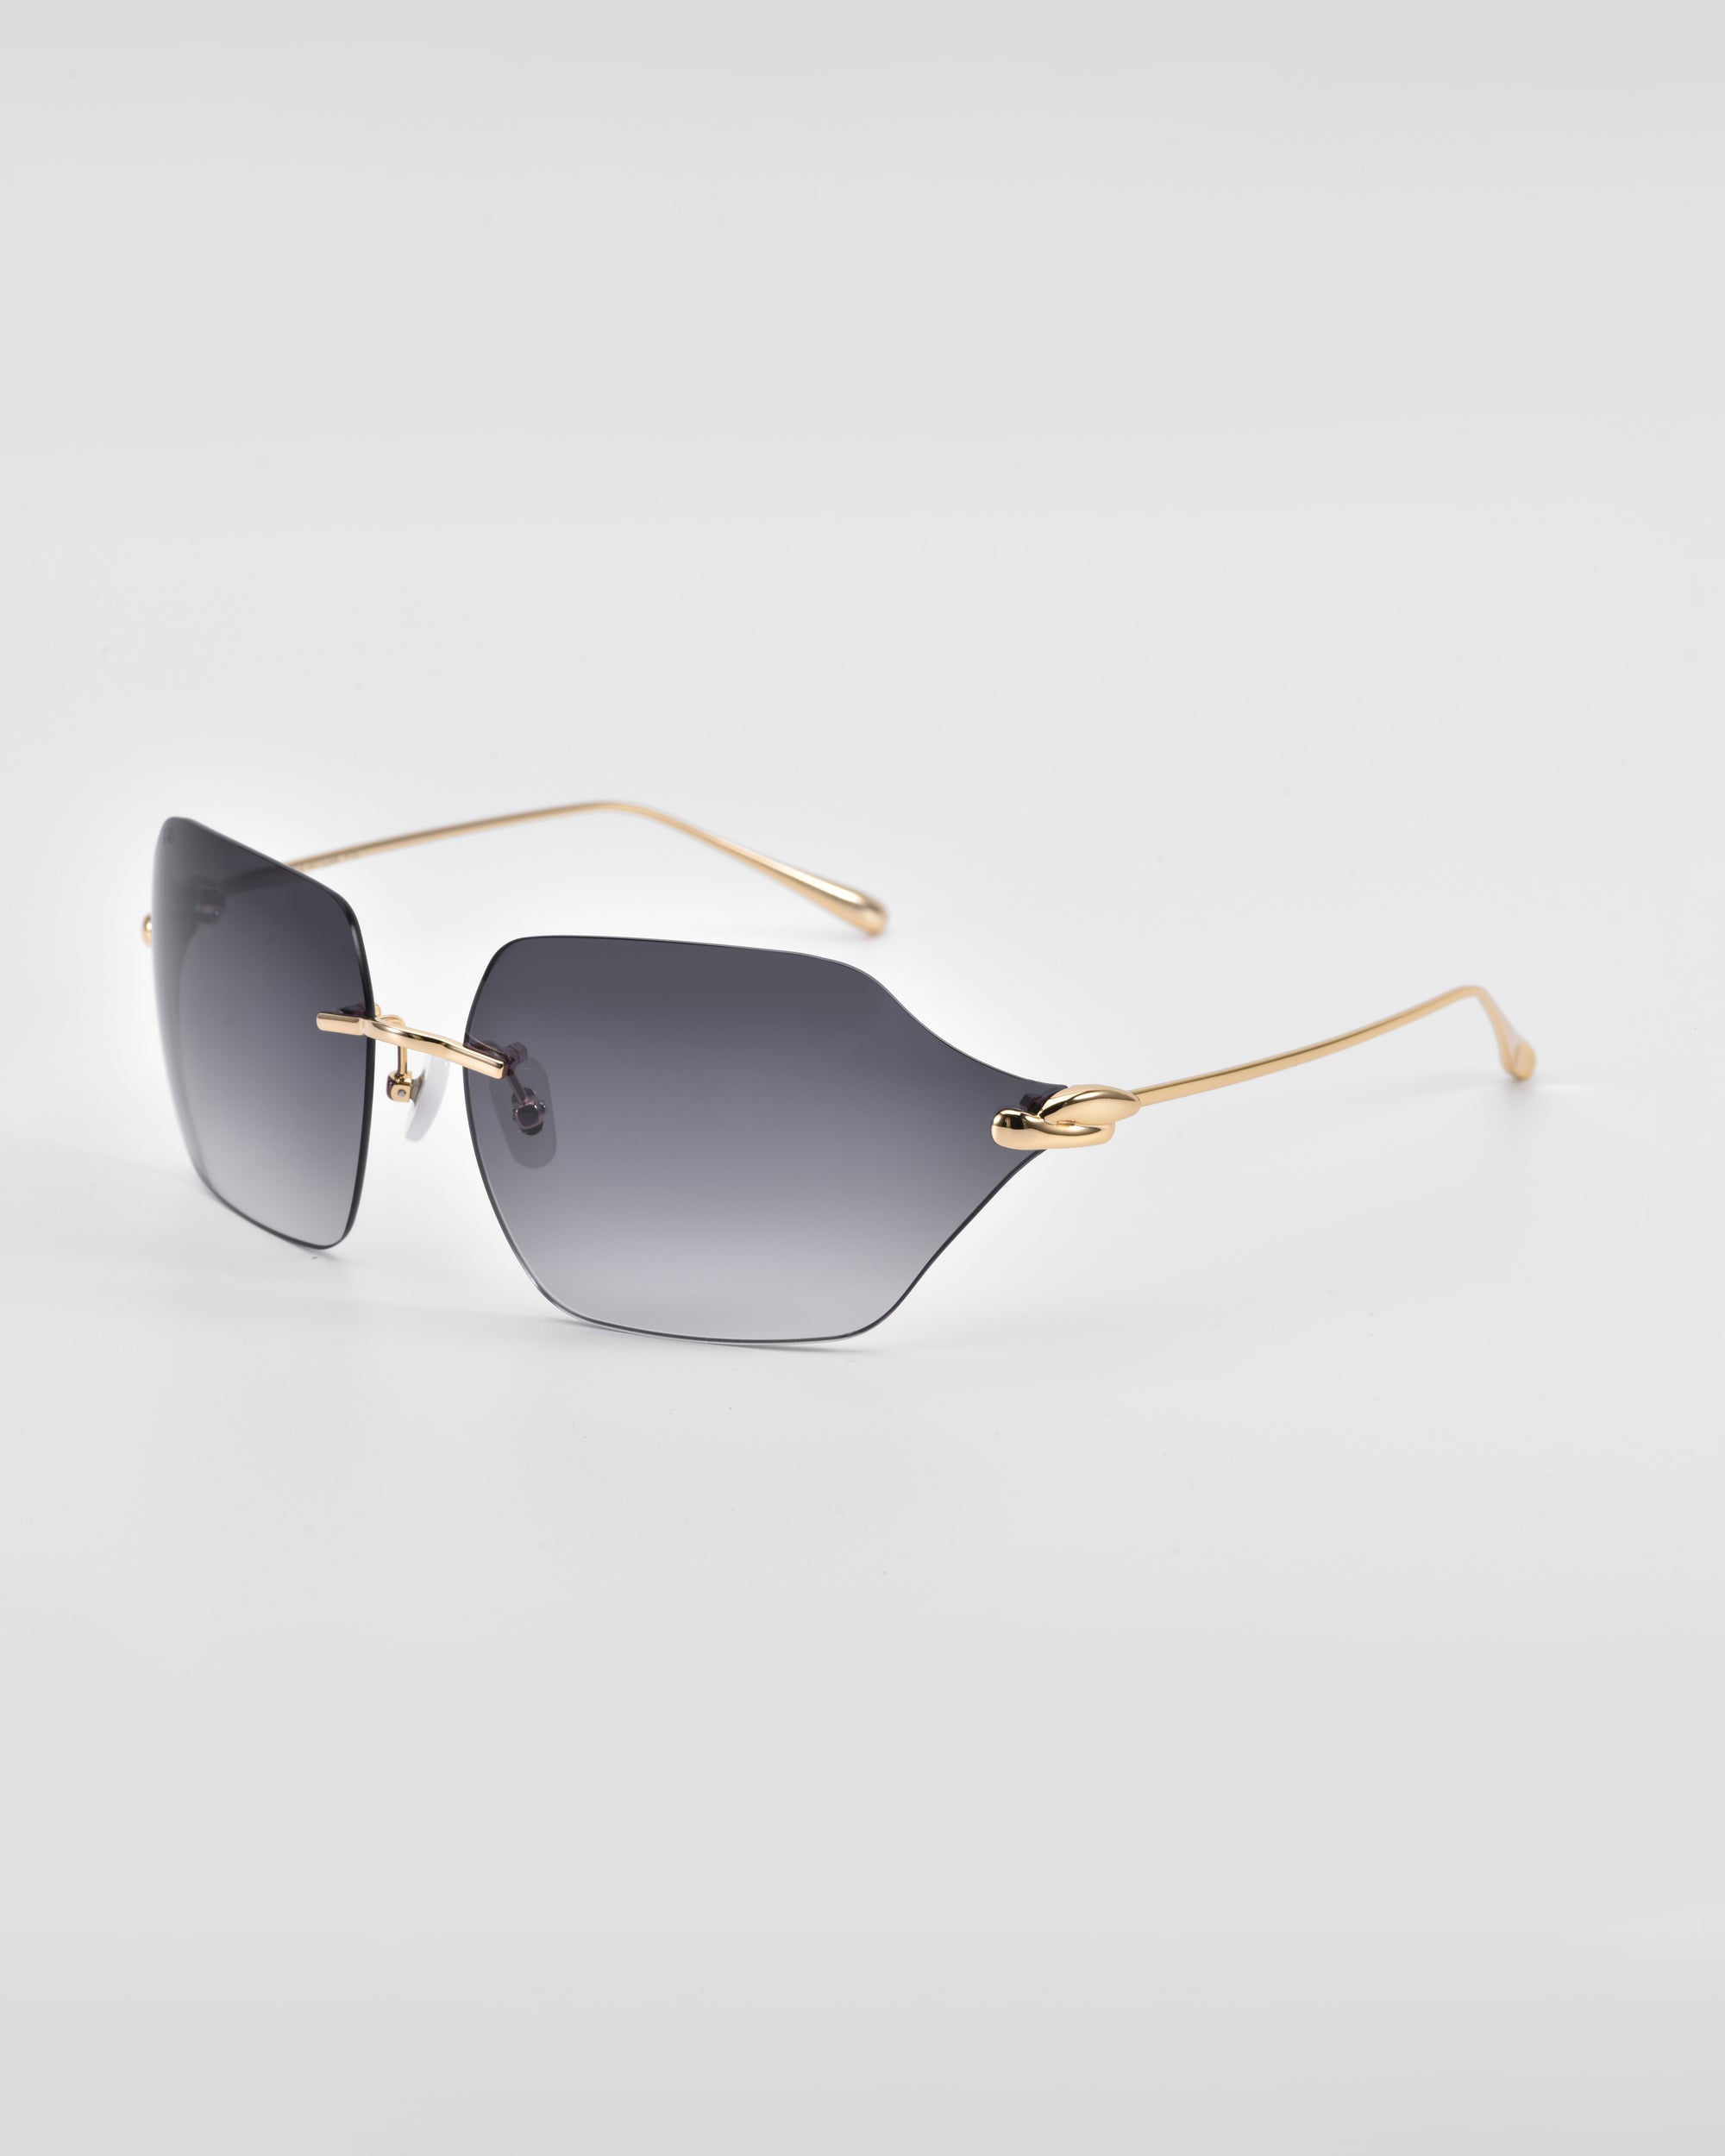 A pair of sleek, modern For Art's Sake® Serpent II sunglasses with grey gradient lens and thin gold temples shown on a plain white background. The design features rimless lenses with a slight cat-eye shape, 18-karat gold plating, and minimalistic yet stylish metal accents.